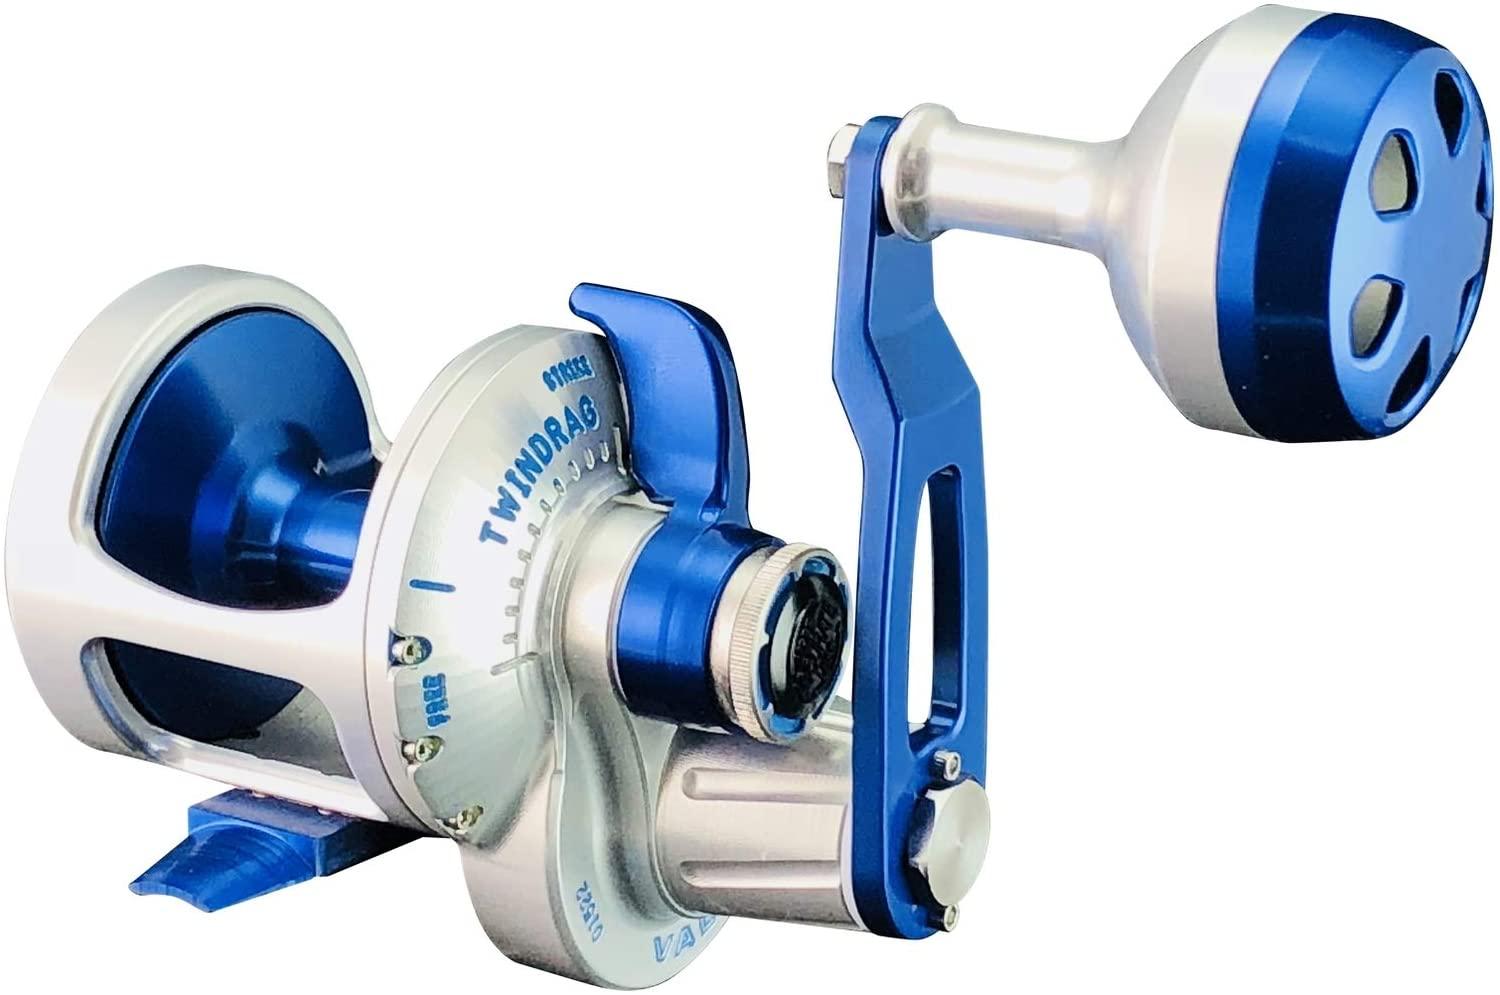 Ammo Bros  ACCURATE BOSS VALIANT 2-SPEED REEL SILVER/BLUE BV2